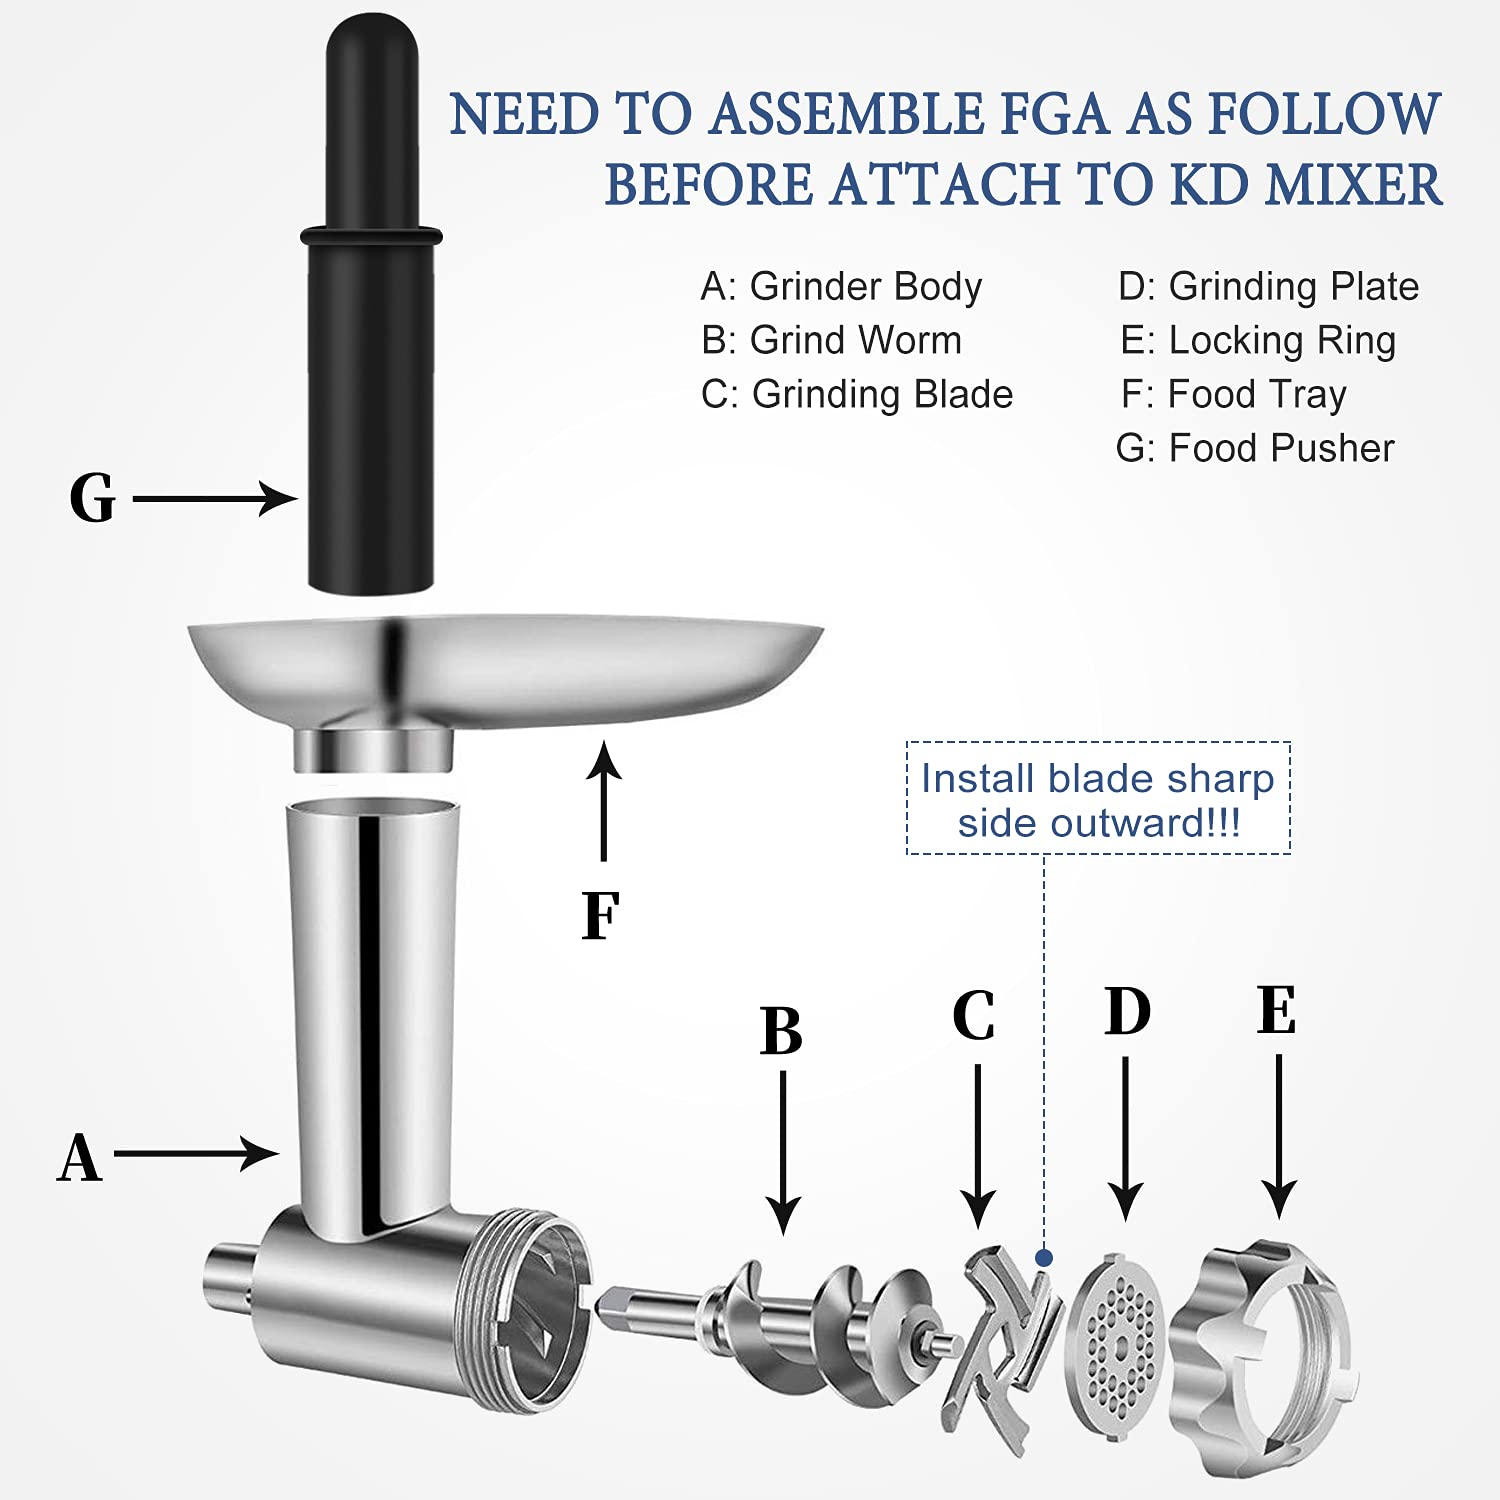 Includes Food Grinder Attachment and Sausage Stuffer Tubes